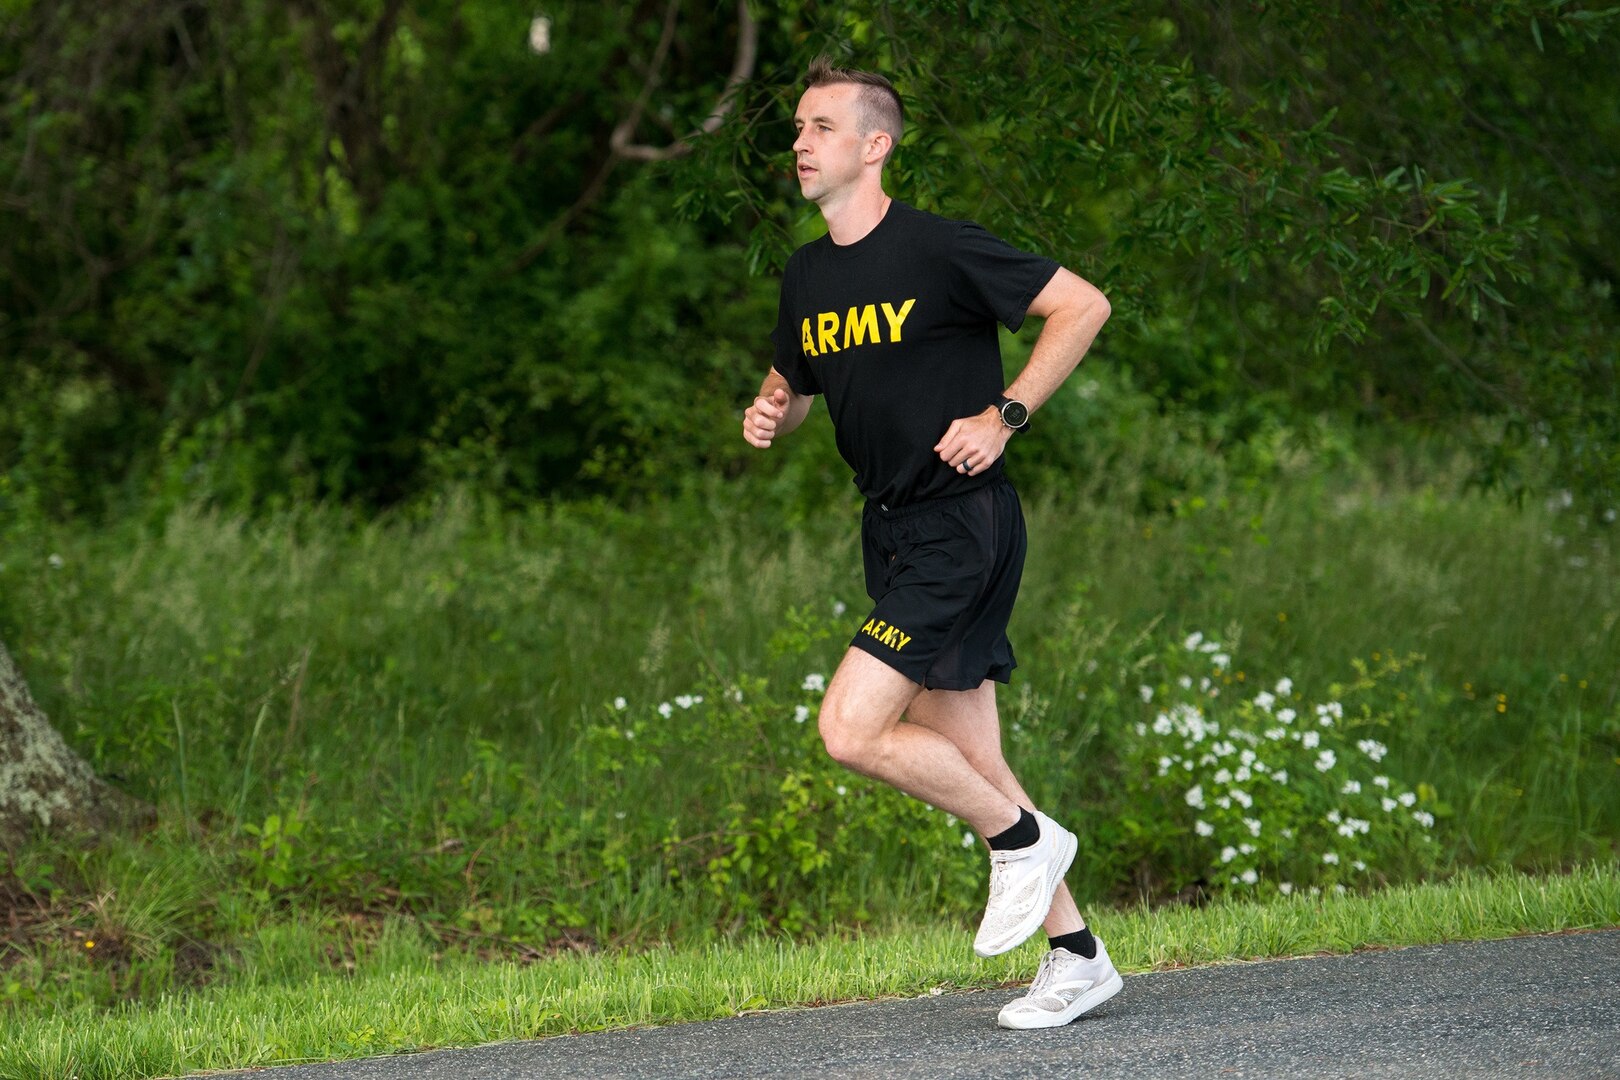 The 36th edition of the world’s third-largest 10-mile road race, the Army Ten-Miler will be held as a virtual event Sunday, Oct. 11 through Sunday, Oct. 18, 2020.